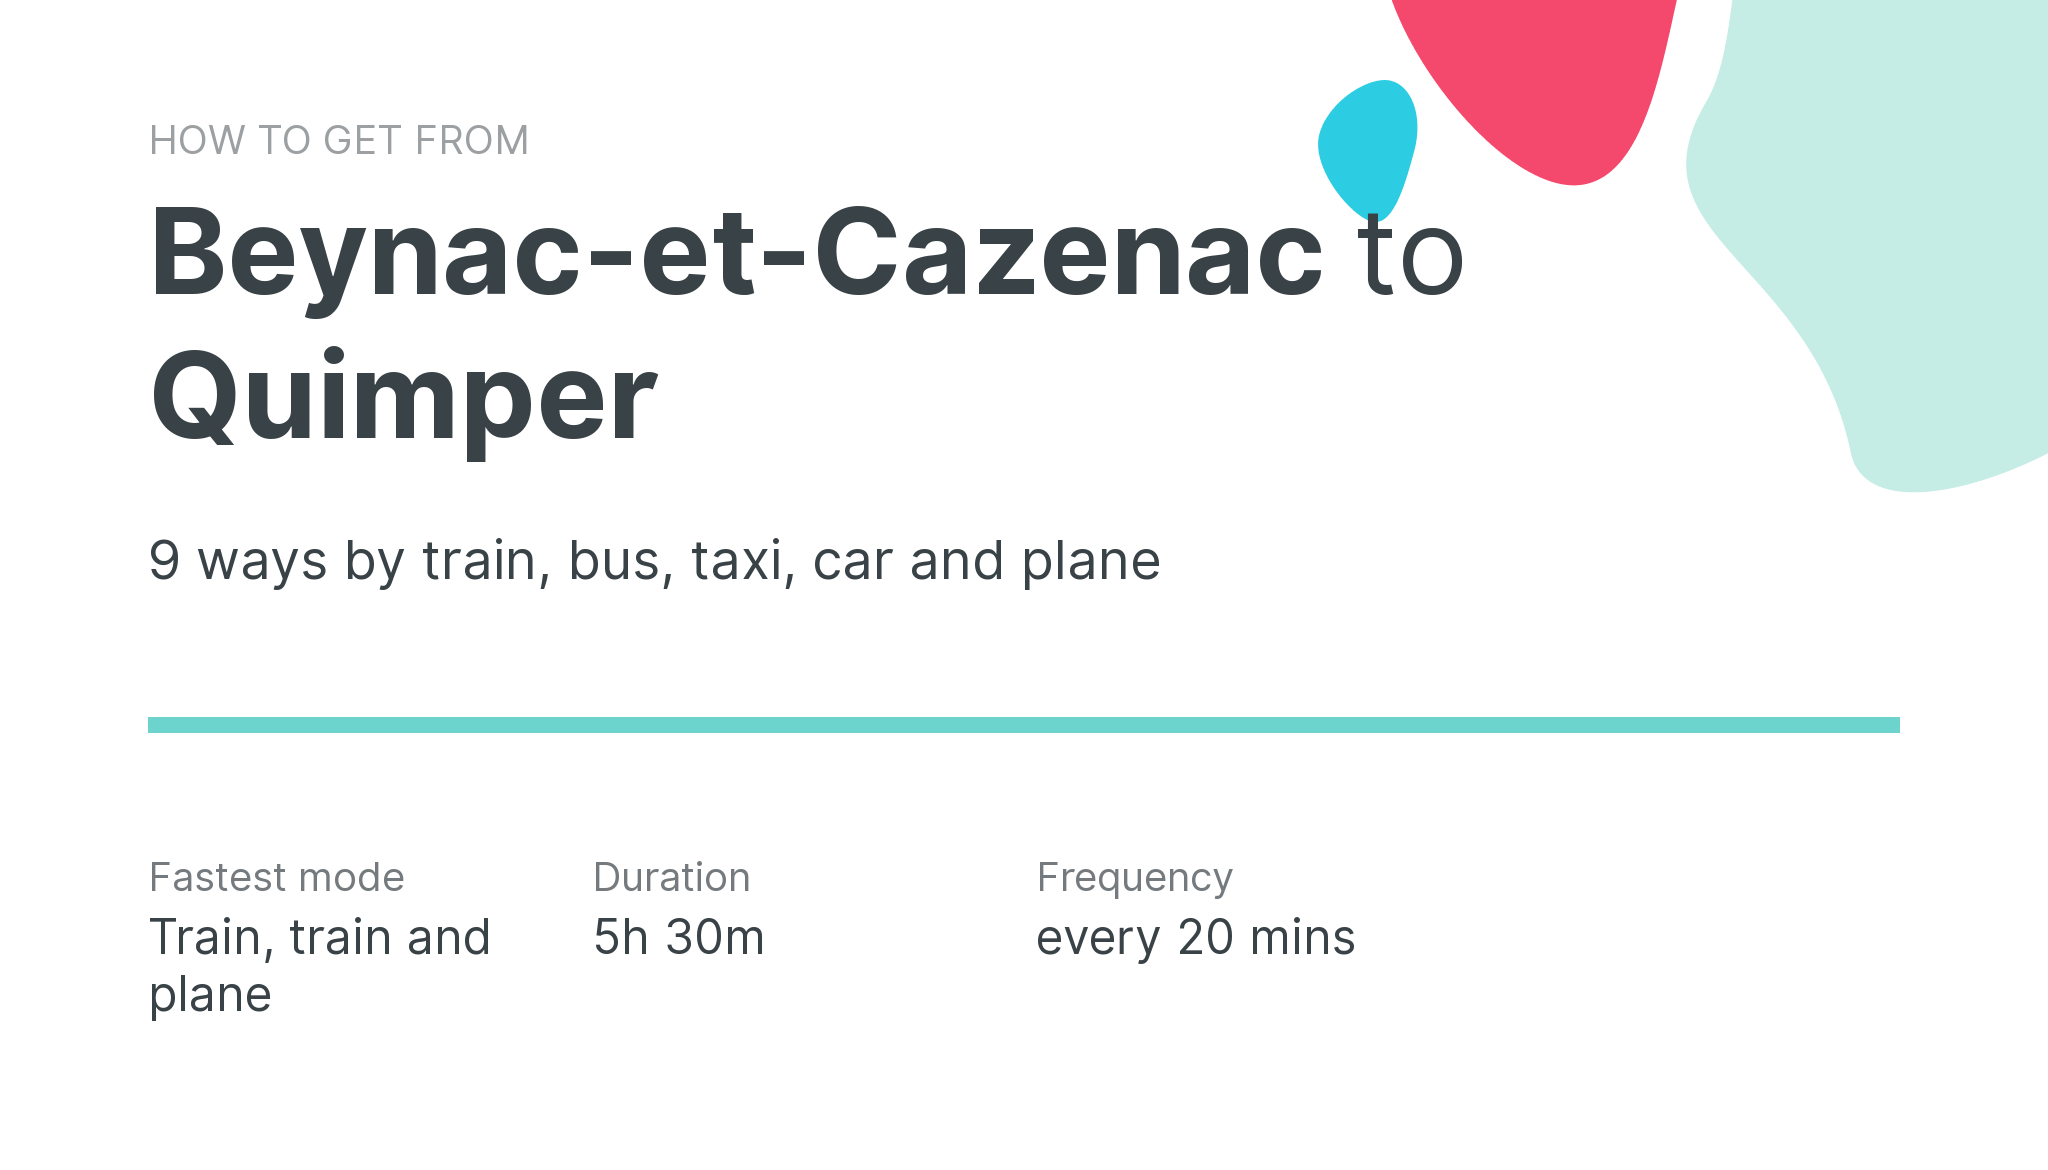 How do I get from Beynac-et-Cazenac to Quimper